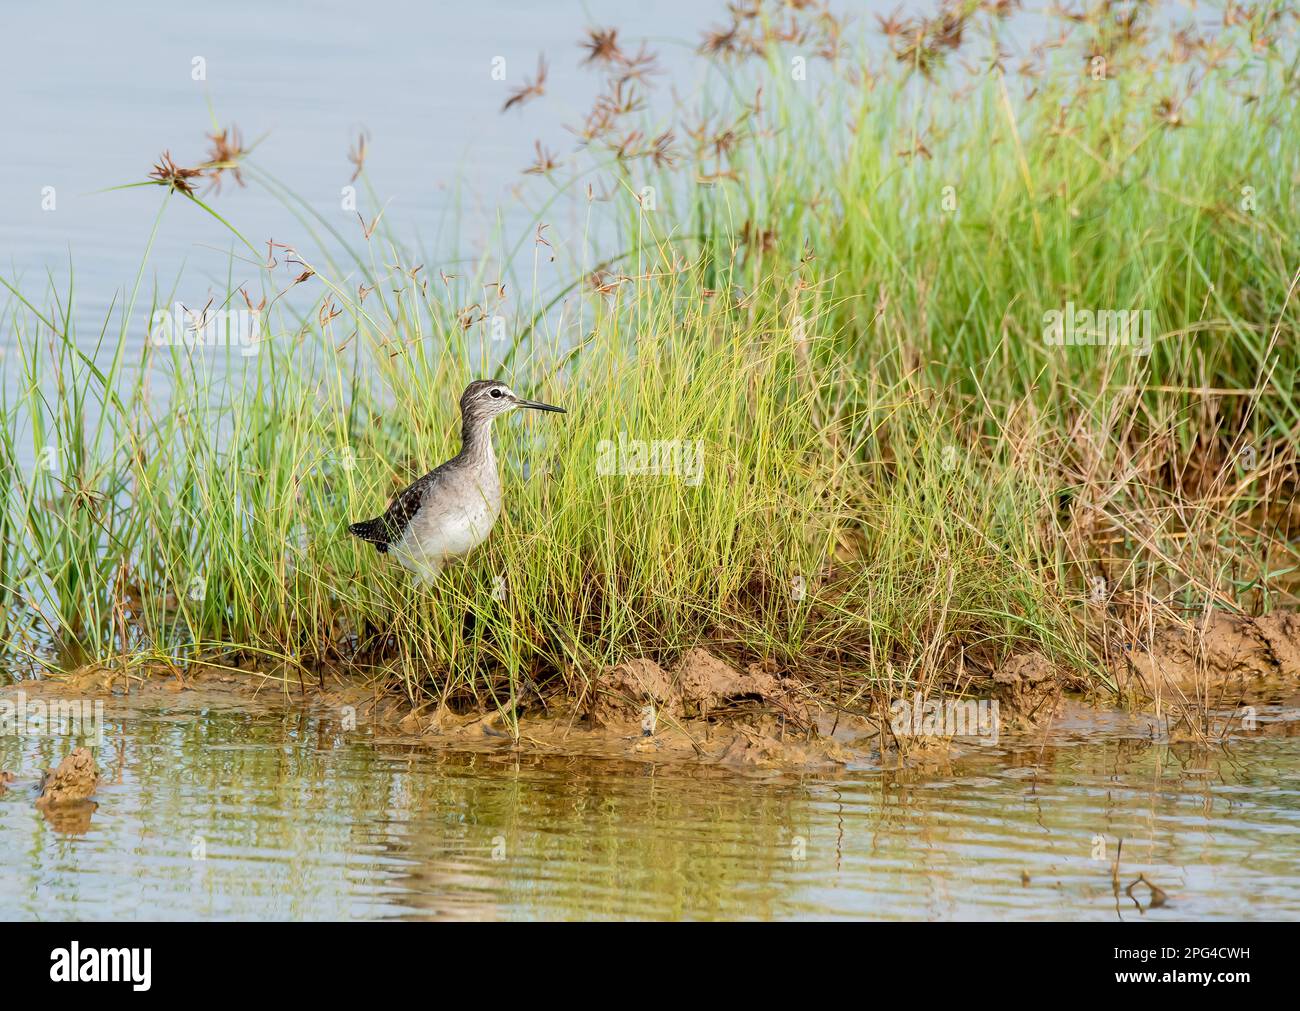 A marsh Sandpiper wading through the marshy waters on the outskirts of Bhuj, Gujarat in an area known as Greater rann of kutch Stock Photo